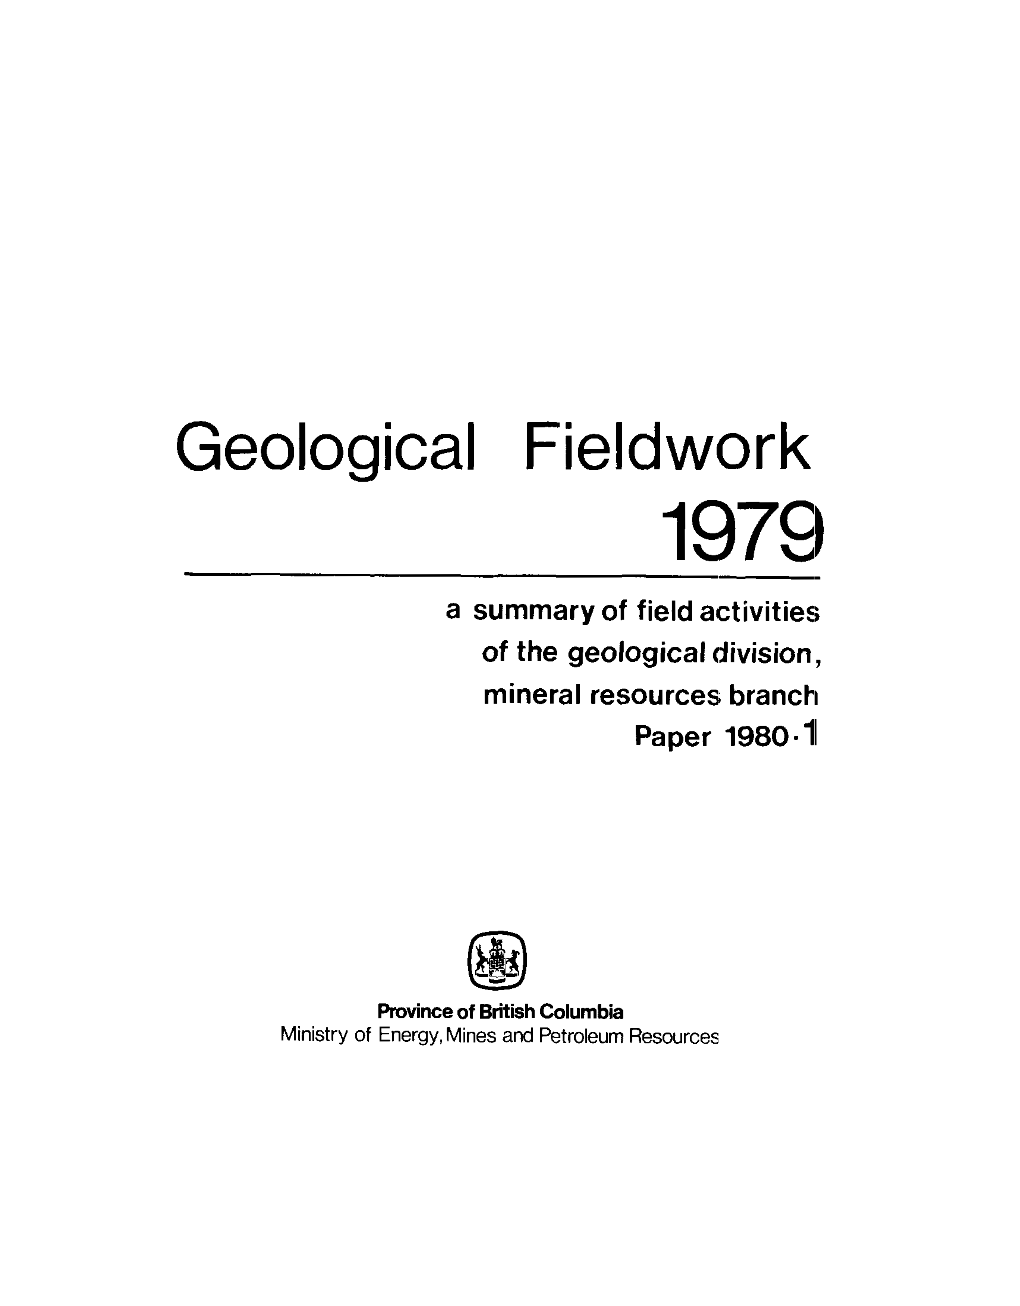 Geological Fieldwork 1979 a Summary of Field Activities; of the Geological Division, Mineral Resources Branch Paper 1980.11